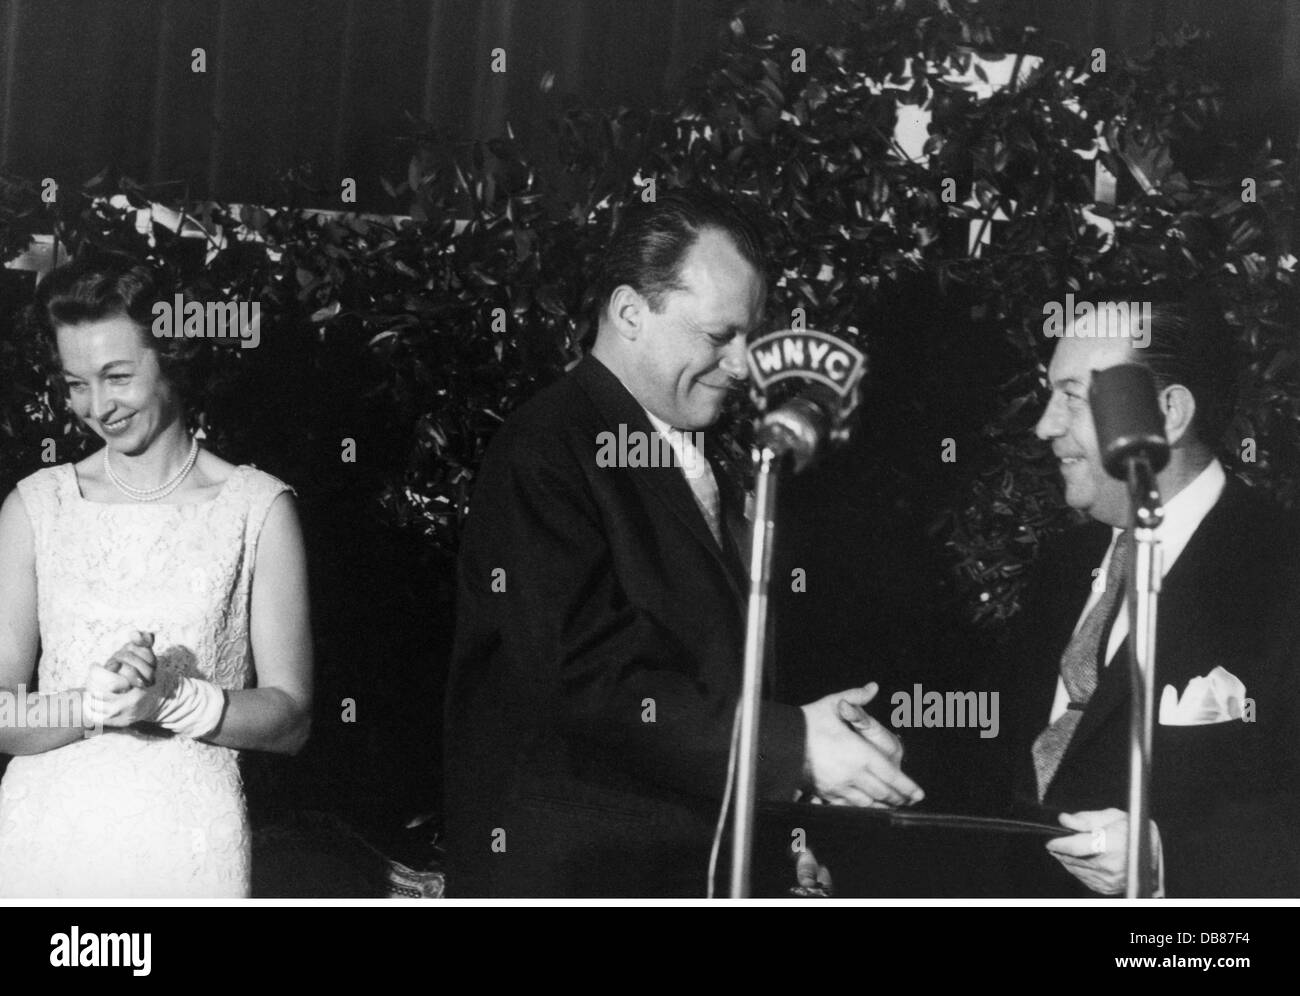 Brandt, Willy, 18.12.1913 - 8. 10.1992, German politician (SPD), Governing Mayor of Berlin 3.10.1957 - 1.12.1966, visit to New York, reception in the hotel Waldorf Astoria, with wife Rut, mayor Robert F. Wagner, 11.2.1959, Stock Photo